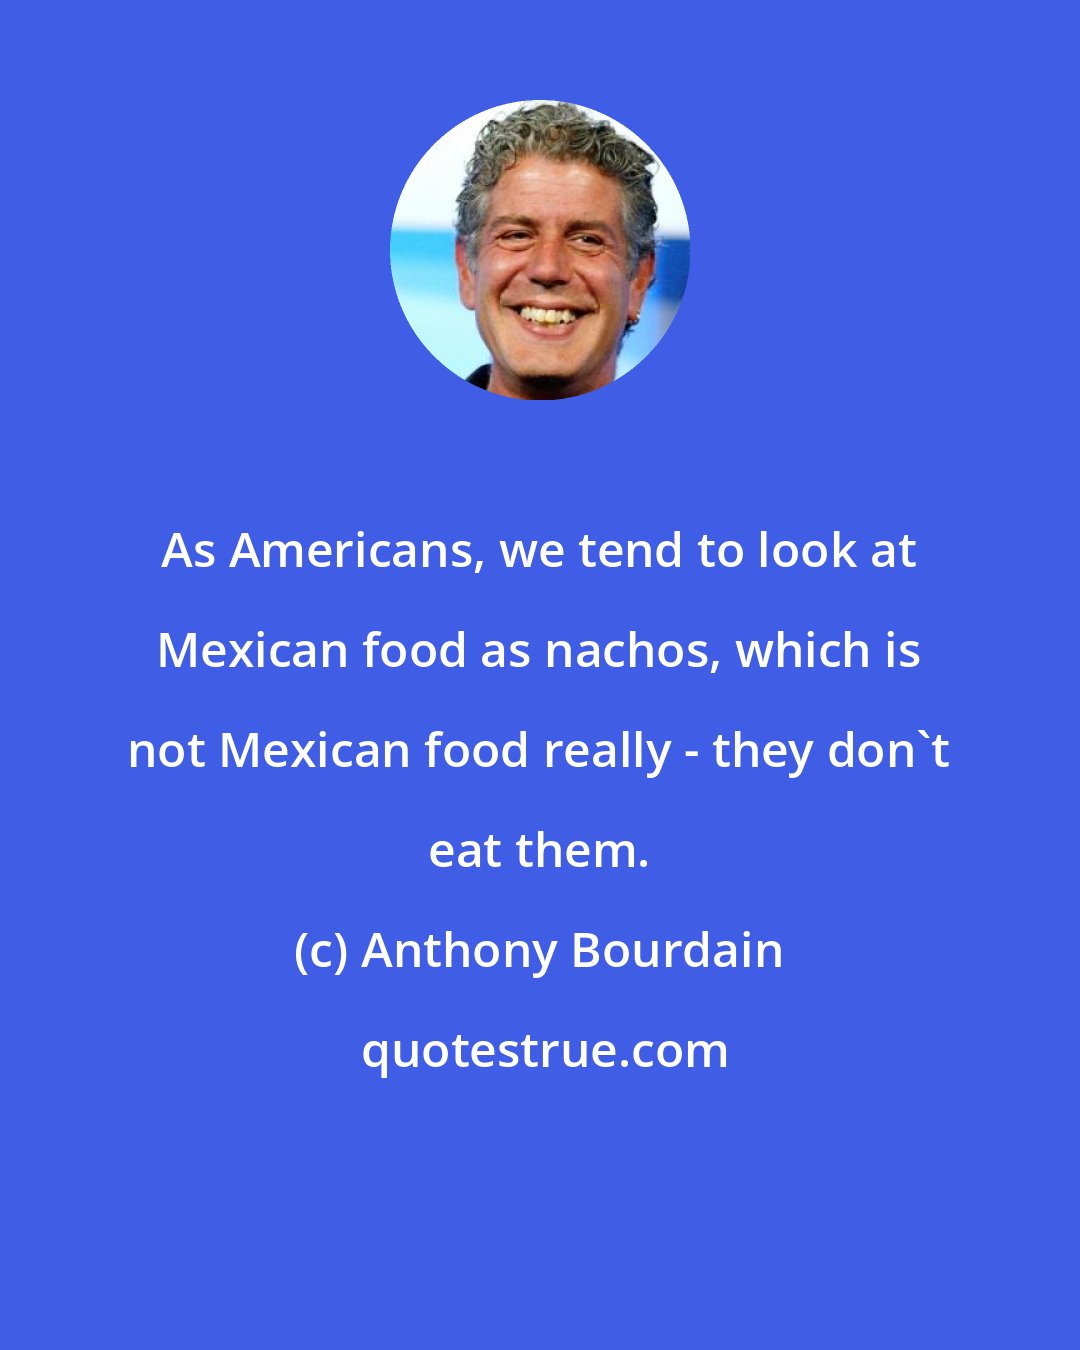 Anthony Bourdain: As Americans, we tend to look at Mexican food as nachos, which is not Mexican food really - they don't eat them.